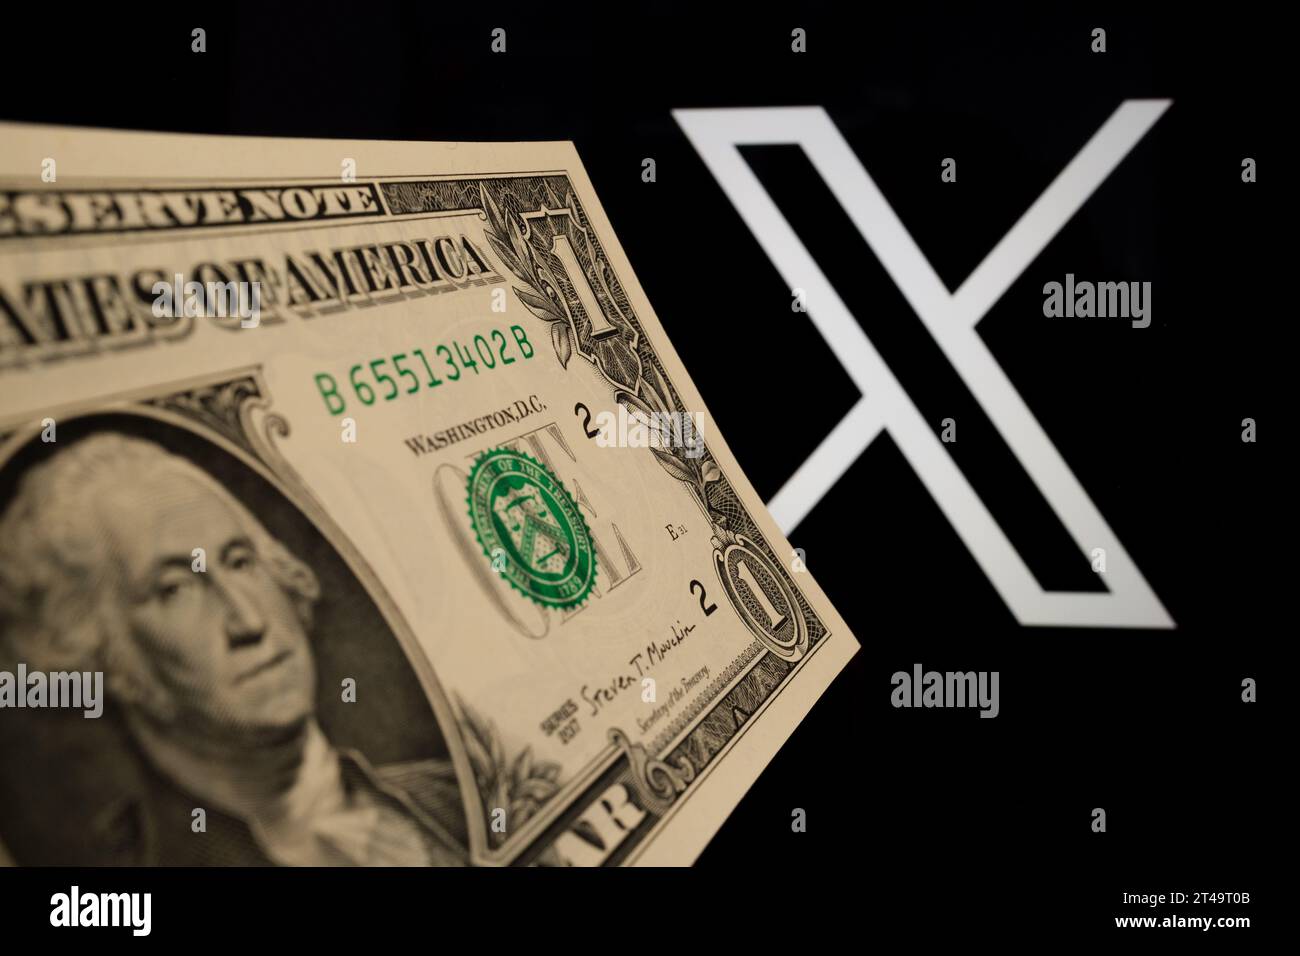 1 dollar banknote in front of blurred X social media platform logo (ex Twitter). Concept for a paid subscription plan. Stafford, United Kingdom, Octob Stock Photo